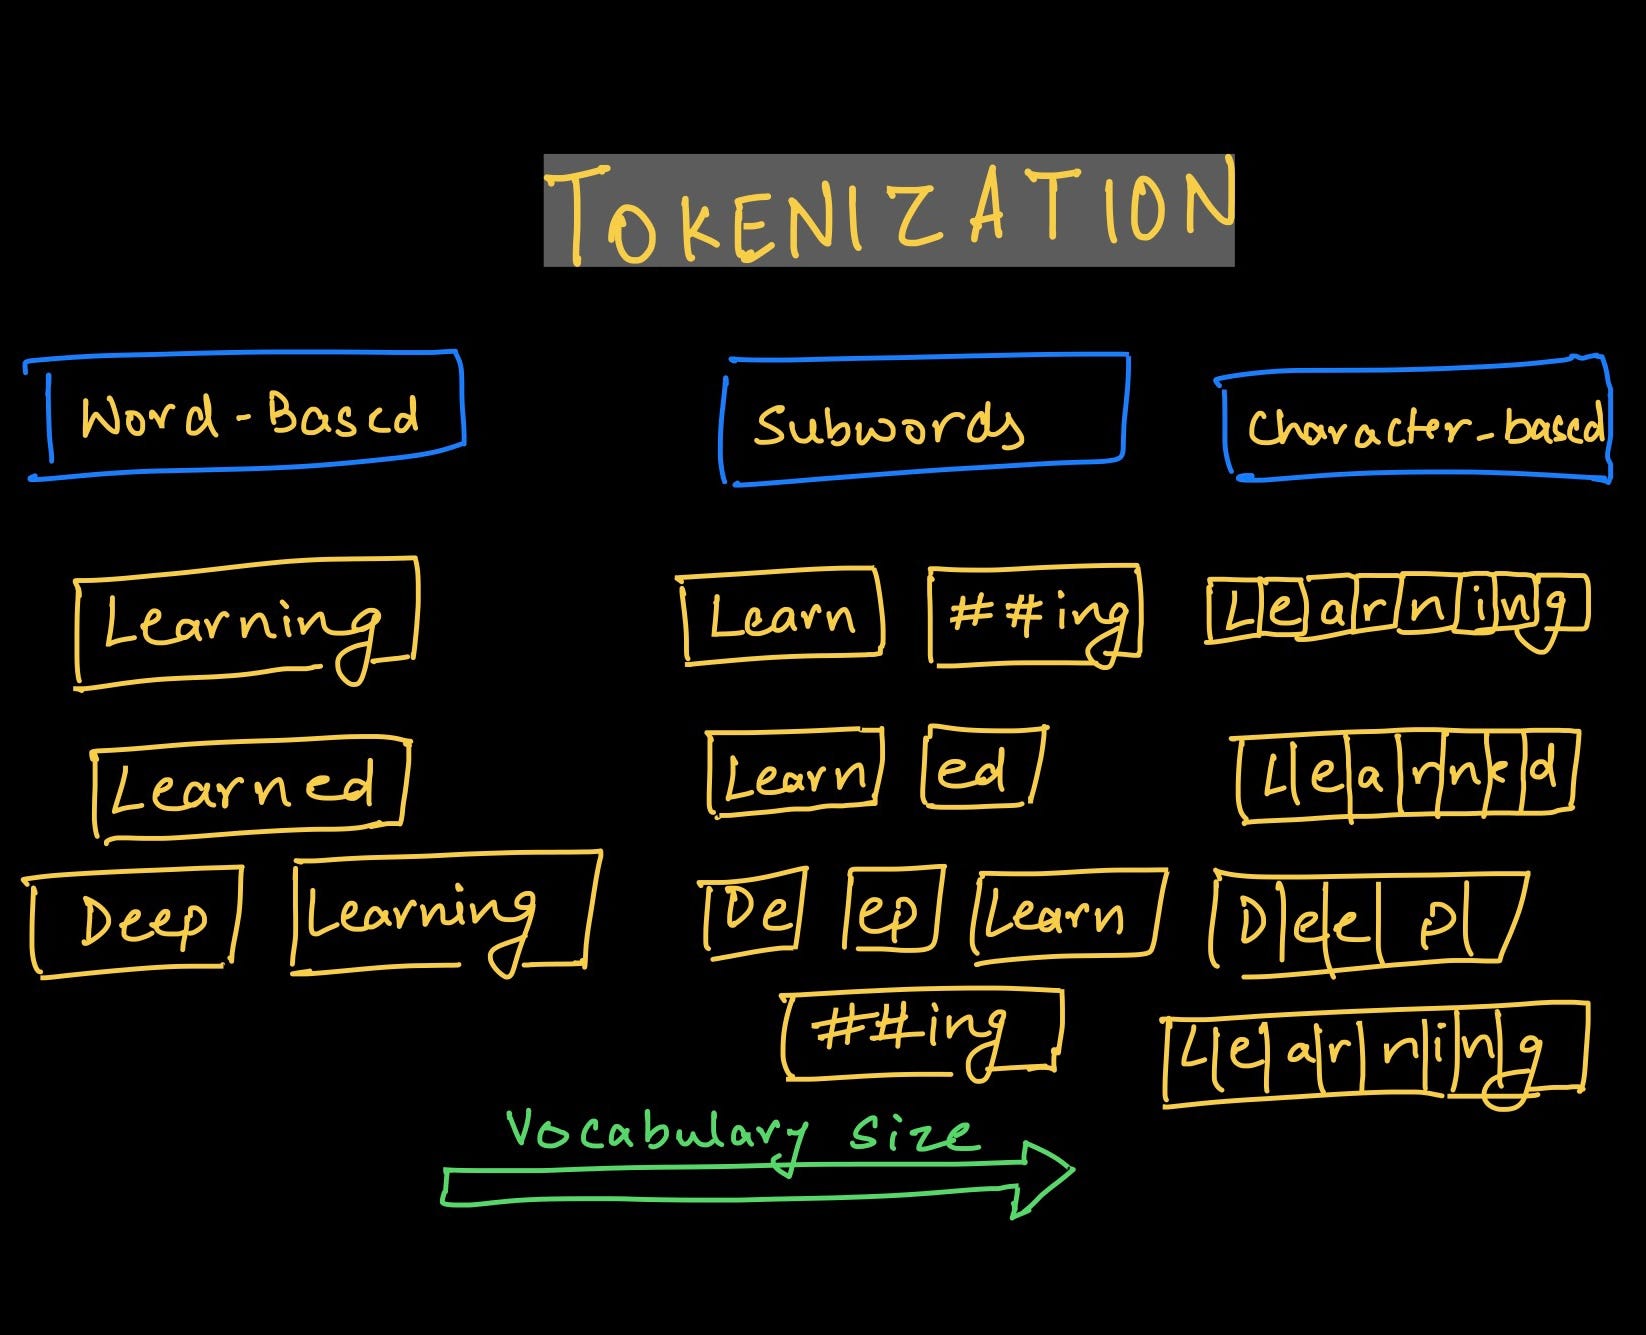 what-purpose-do-we-use-tokenization-nlp-for